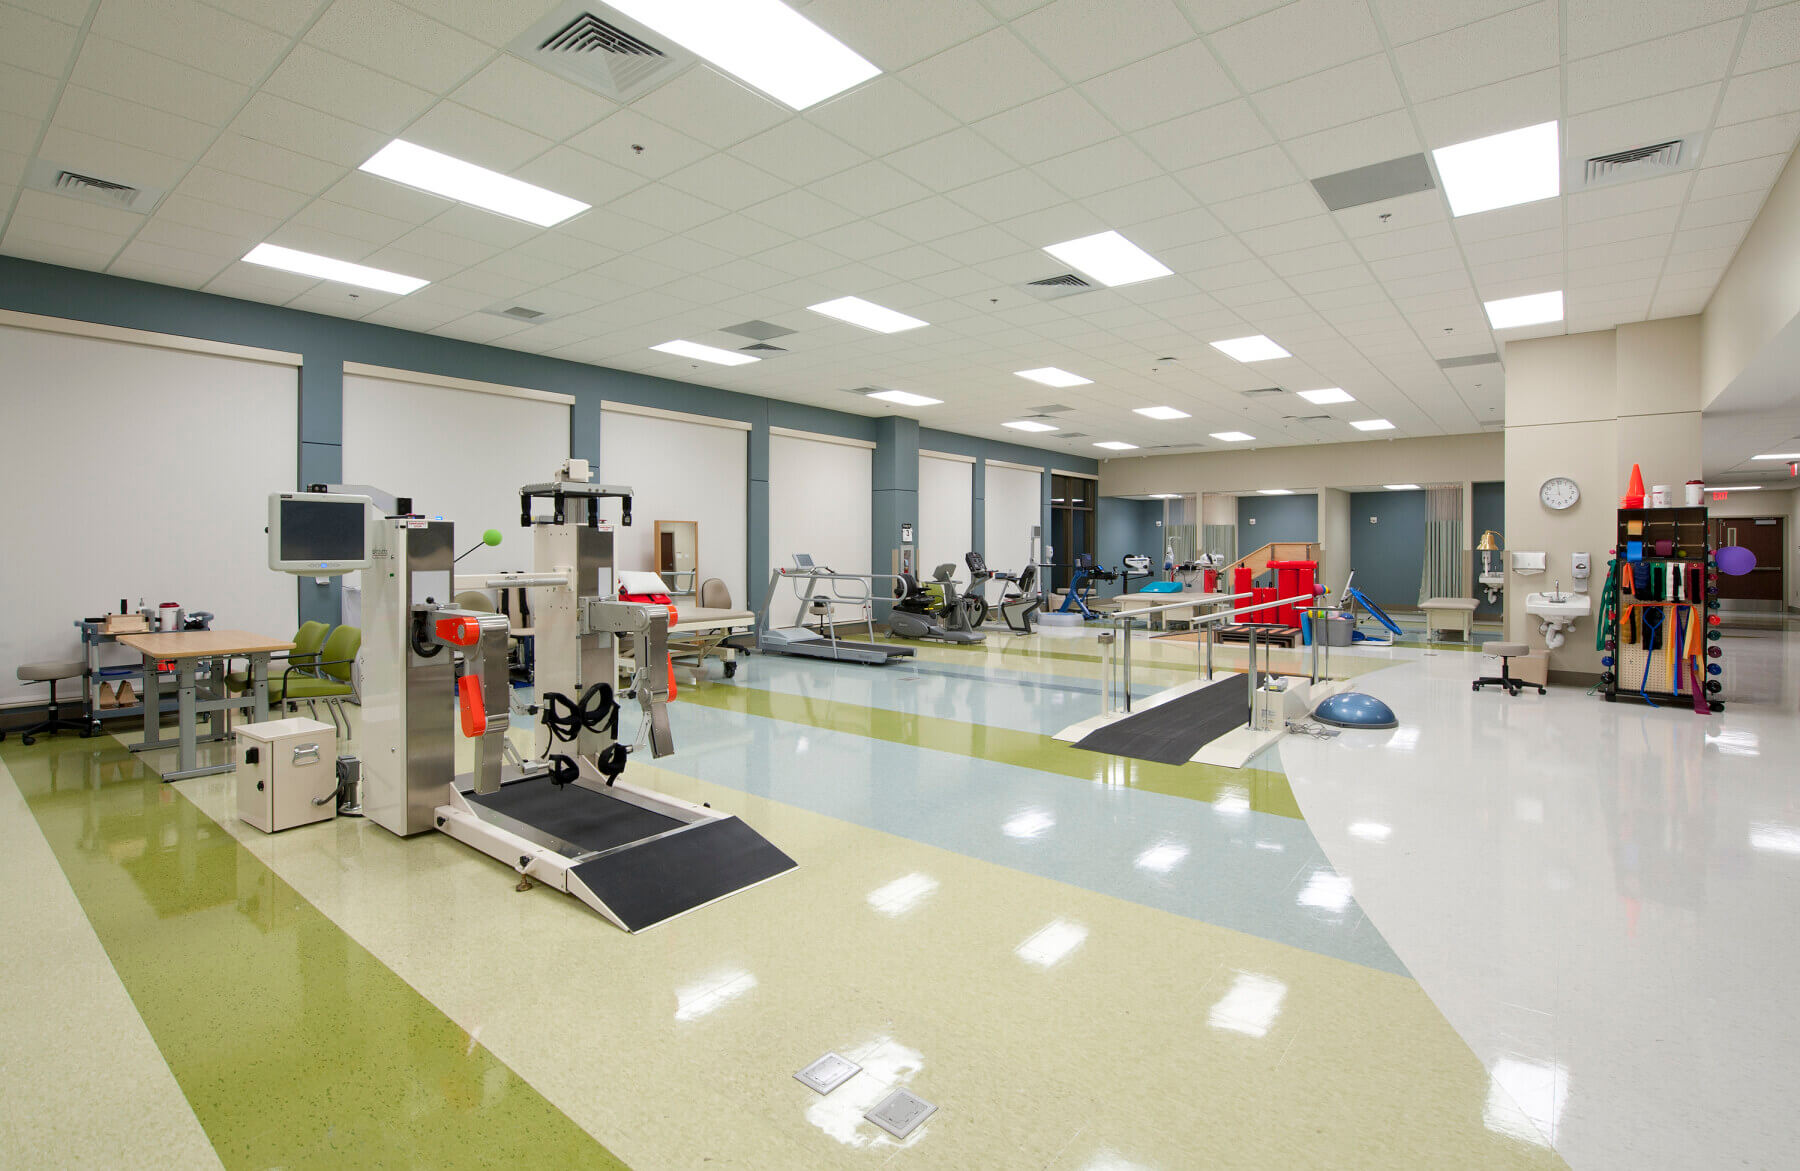 the gym in the rehab hospital